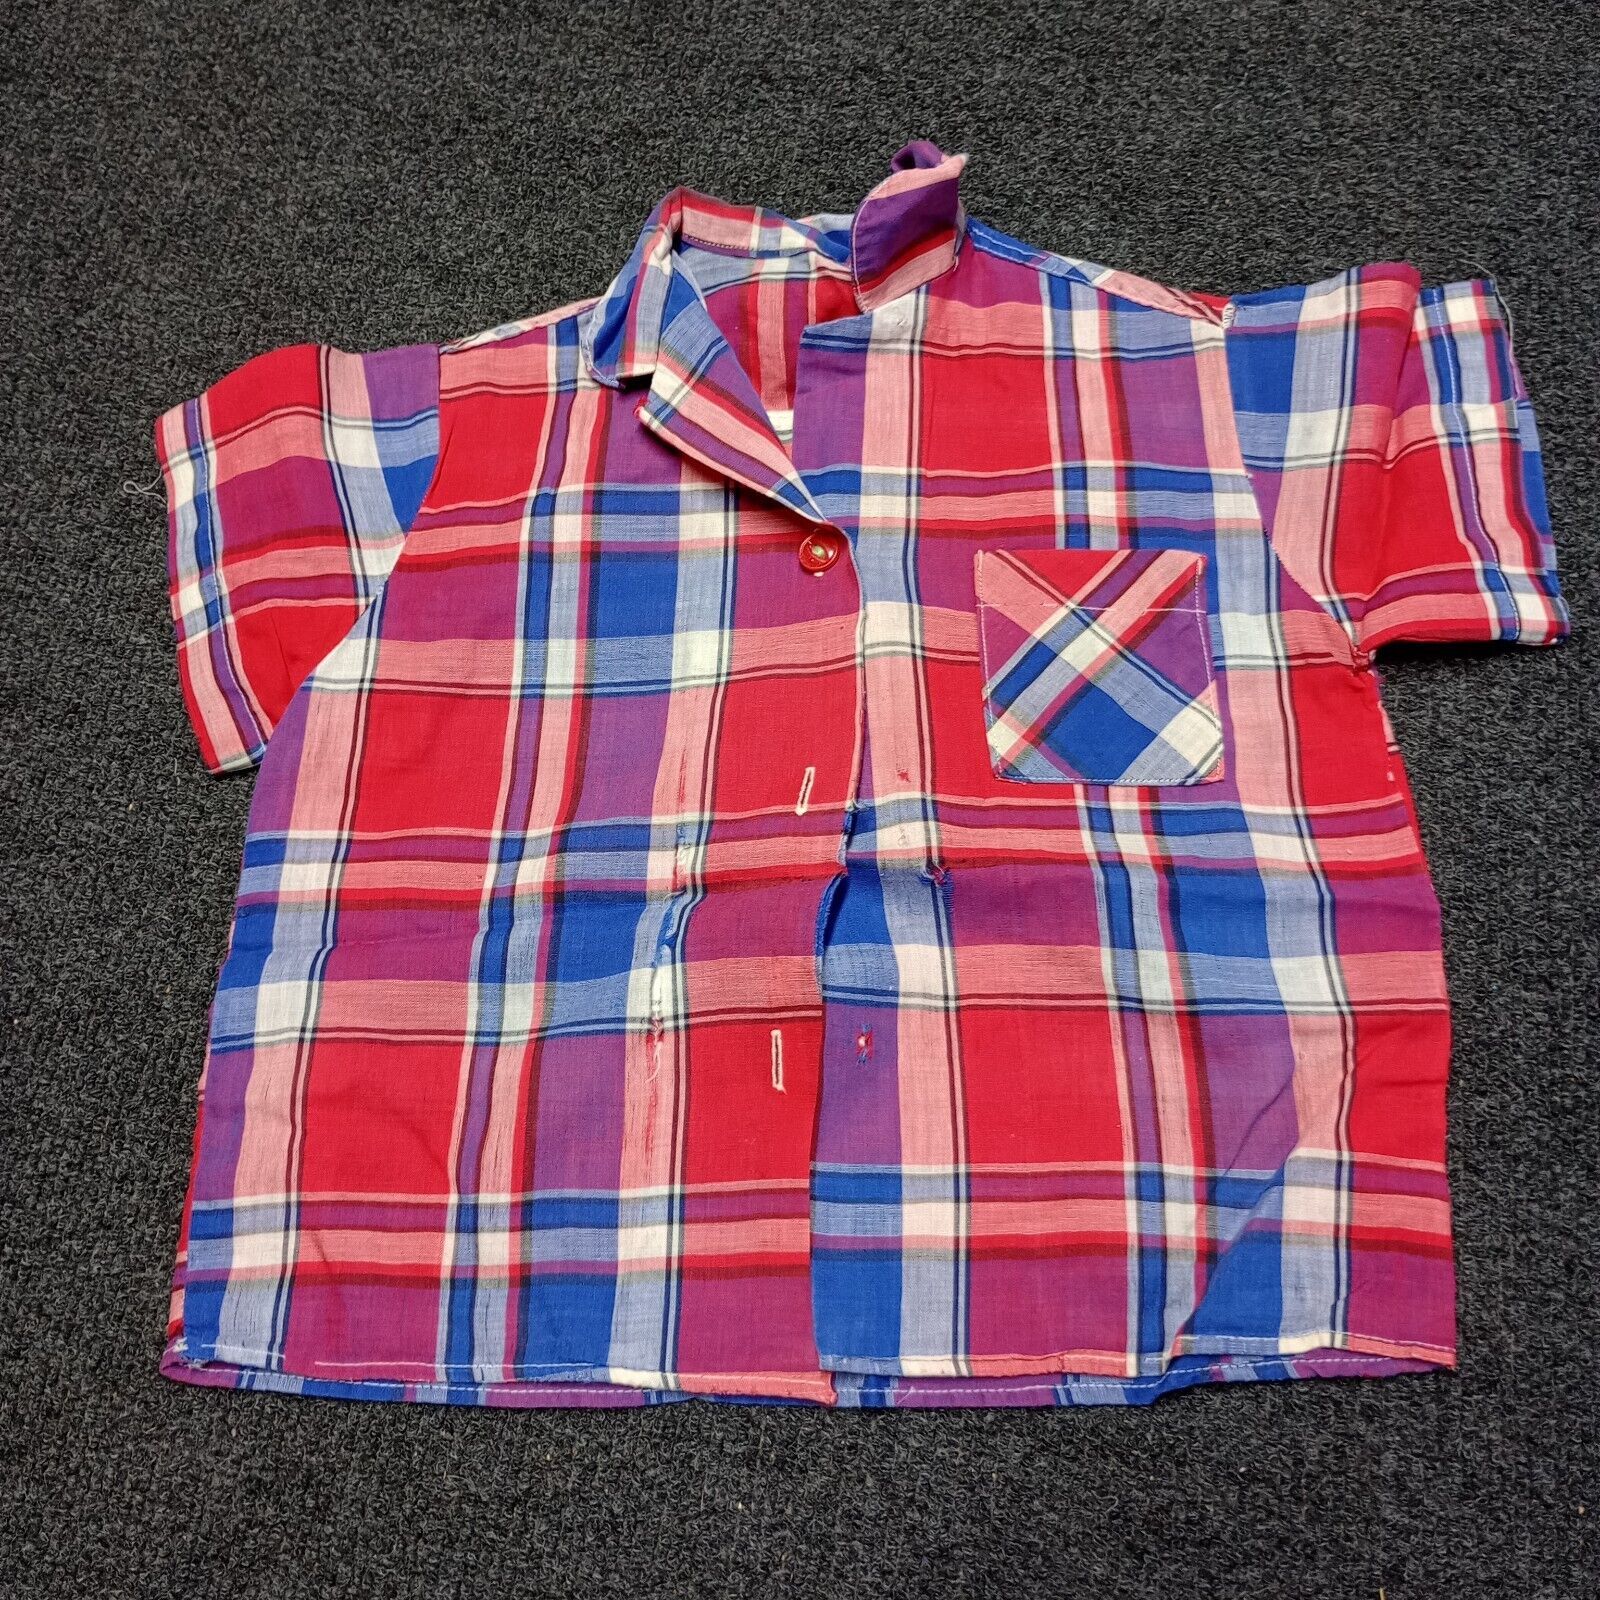 Primary image for Vintage 50s 60s Button Up Shirt Short Sleeve Red Blue Plaid Needs Repair